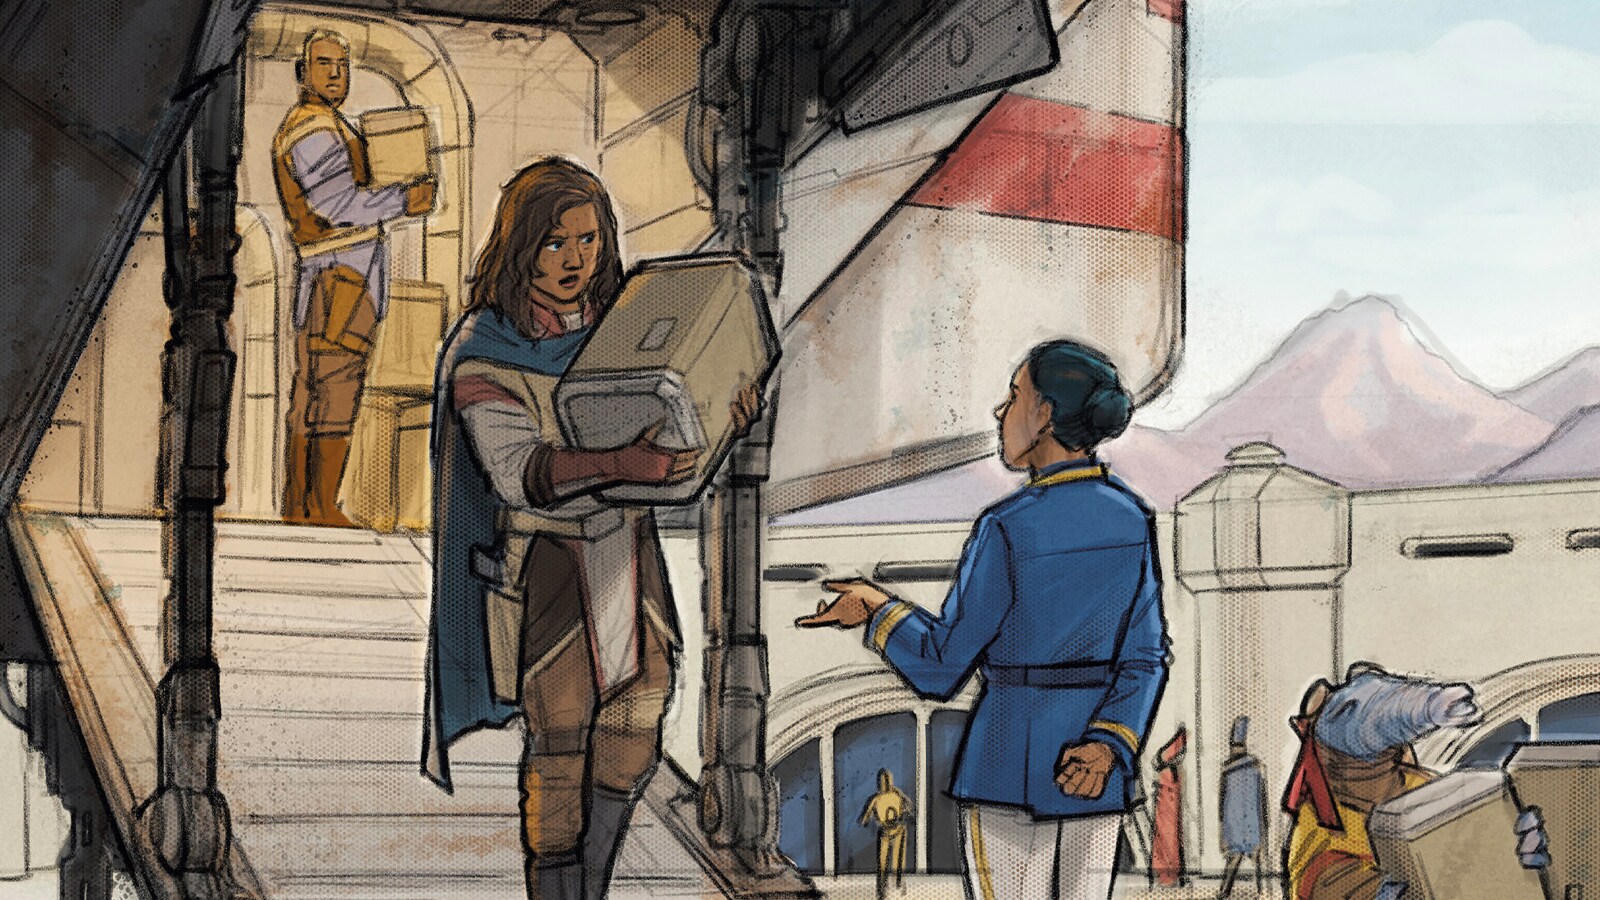 From the Pages of Star Wars Insider: A New Mission Begins in an Original Star Wars: The High Republic Tale